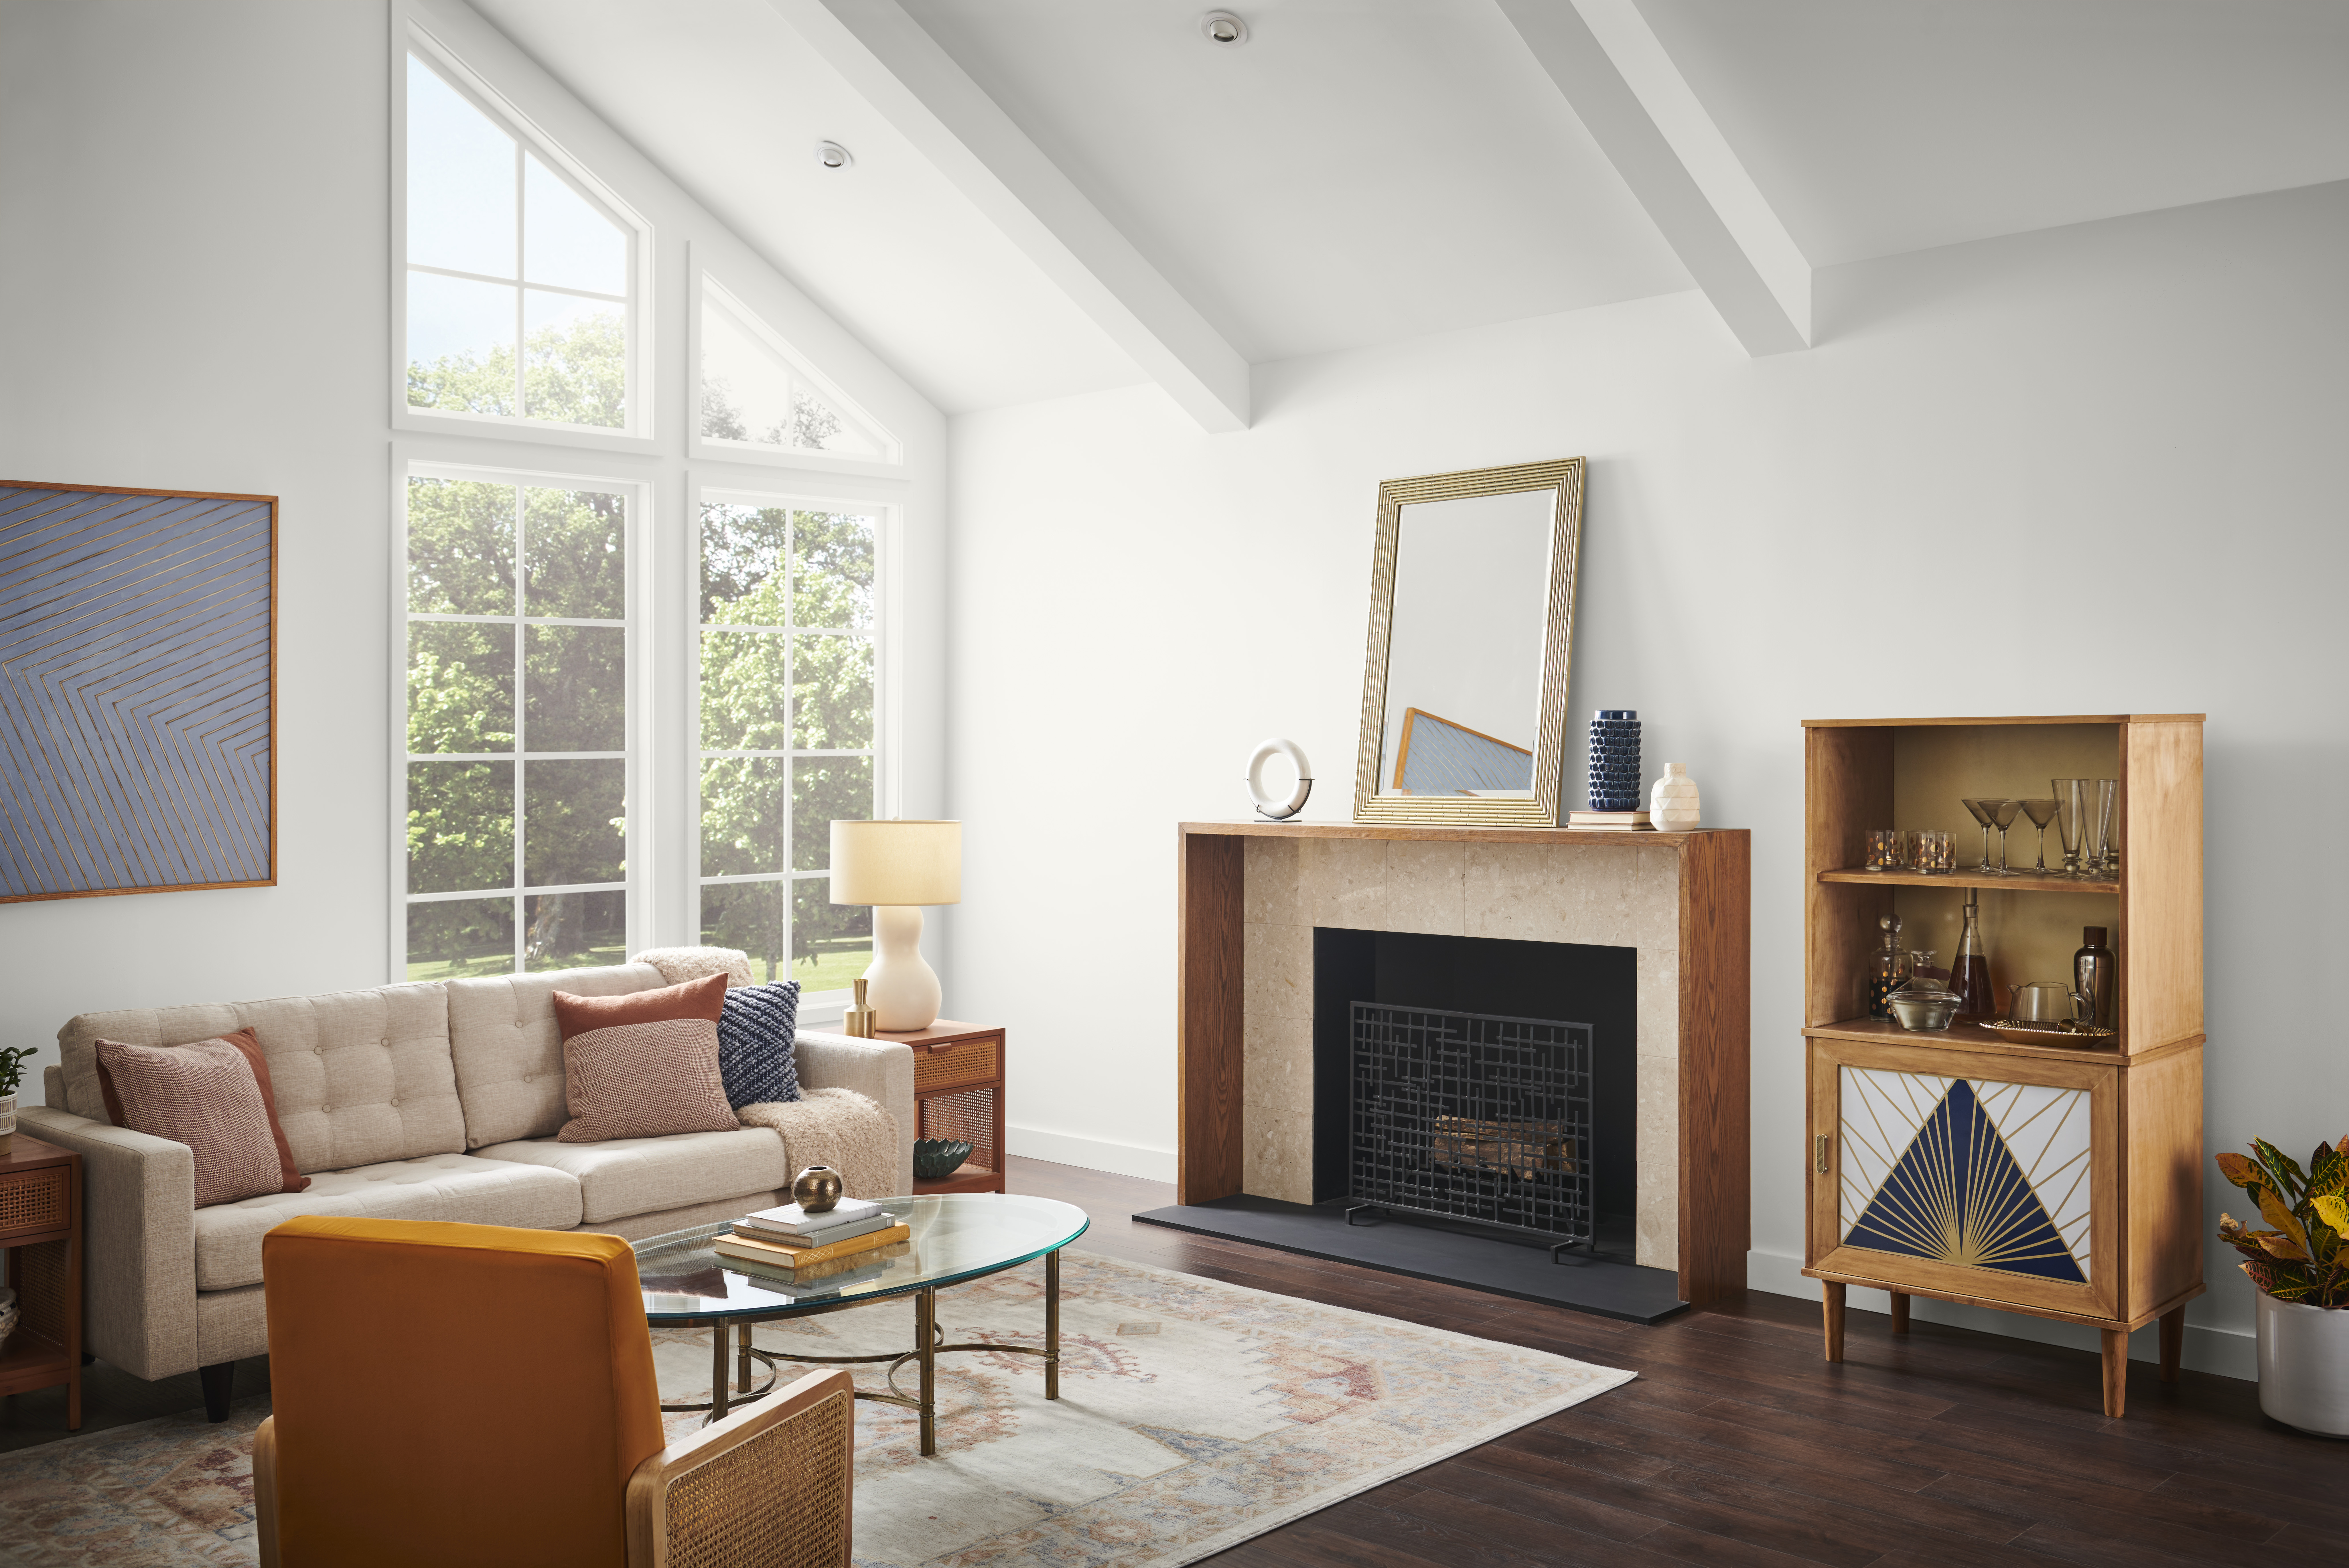 A spacious and bright living room with walls painted in white, contrasting with the dark wood floors and retro furniture